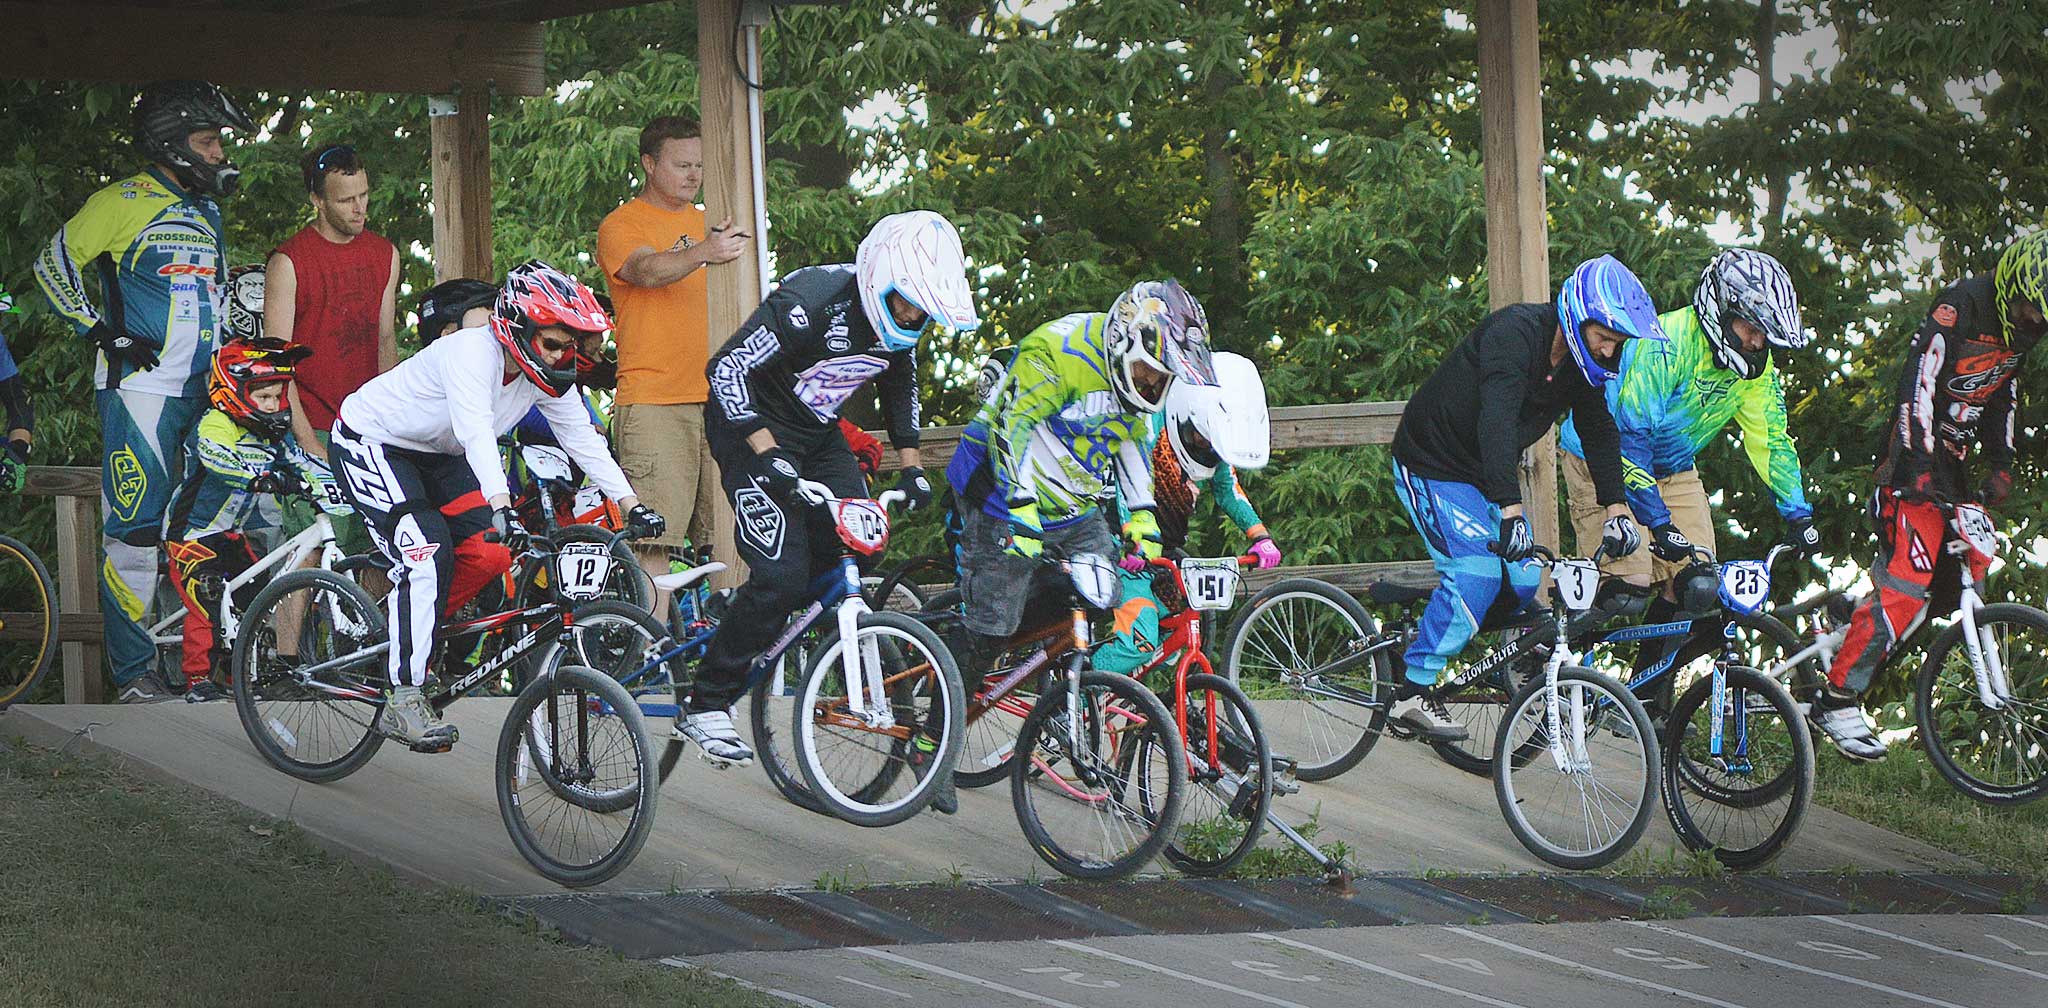 Riders leave the starting gate at the Columbus BMX track.